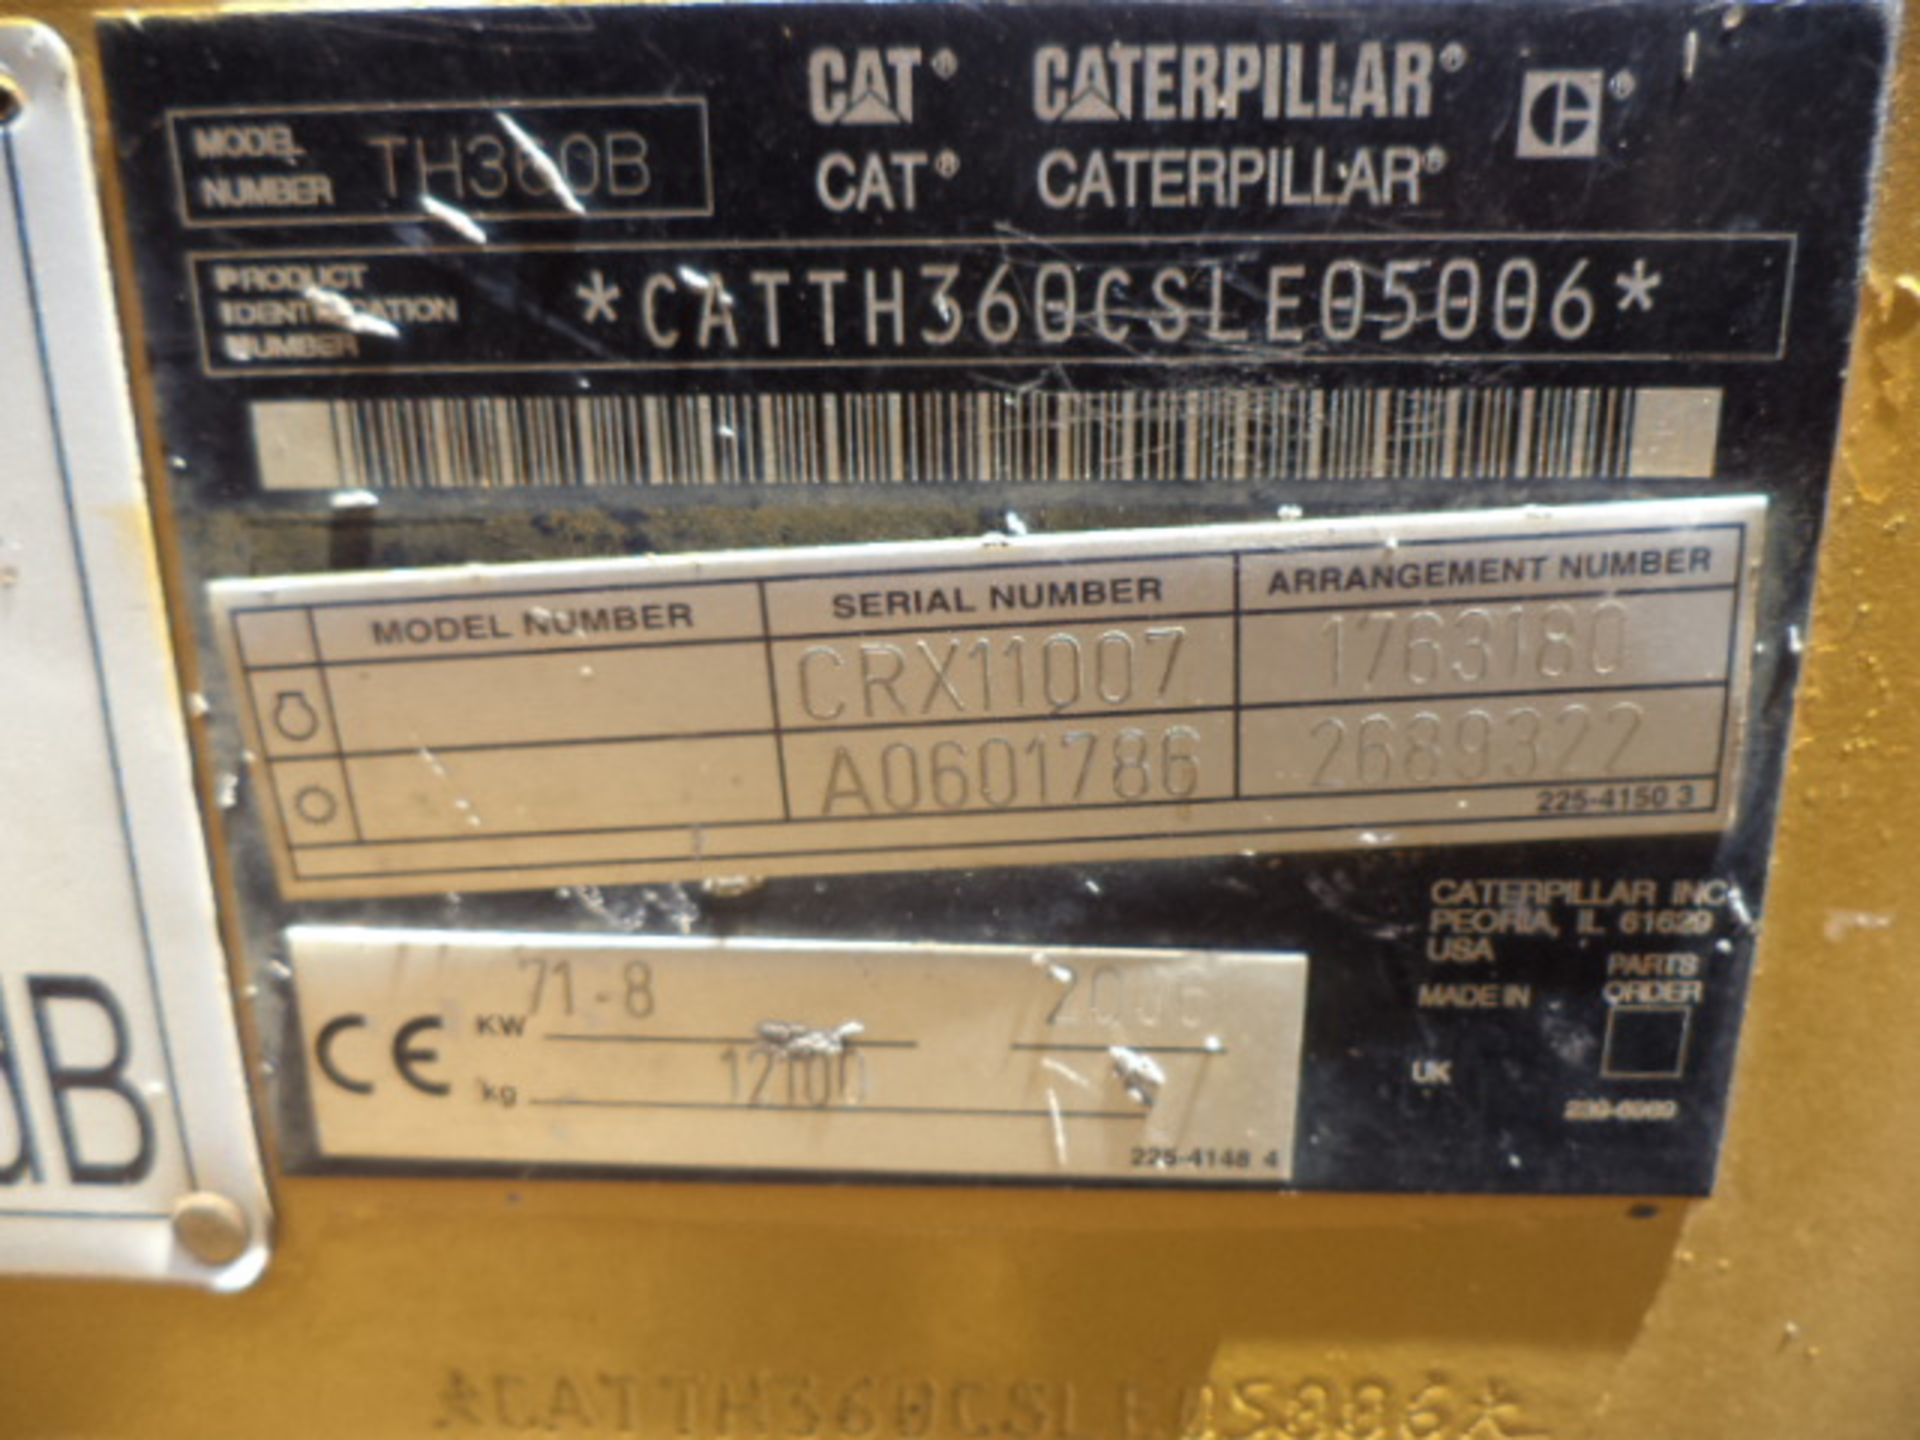 Caterpillar TH360B Telly Handler (S#: CATTH360CSLE05006) (9 419 hrs ) - Image 5 of 6